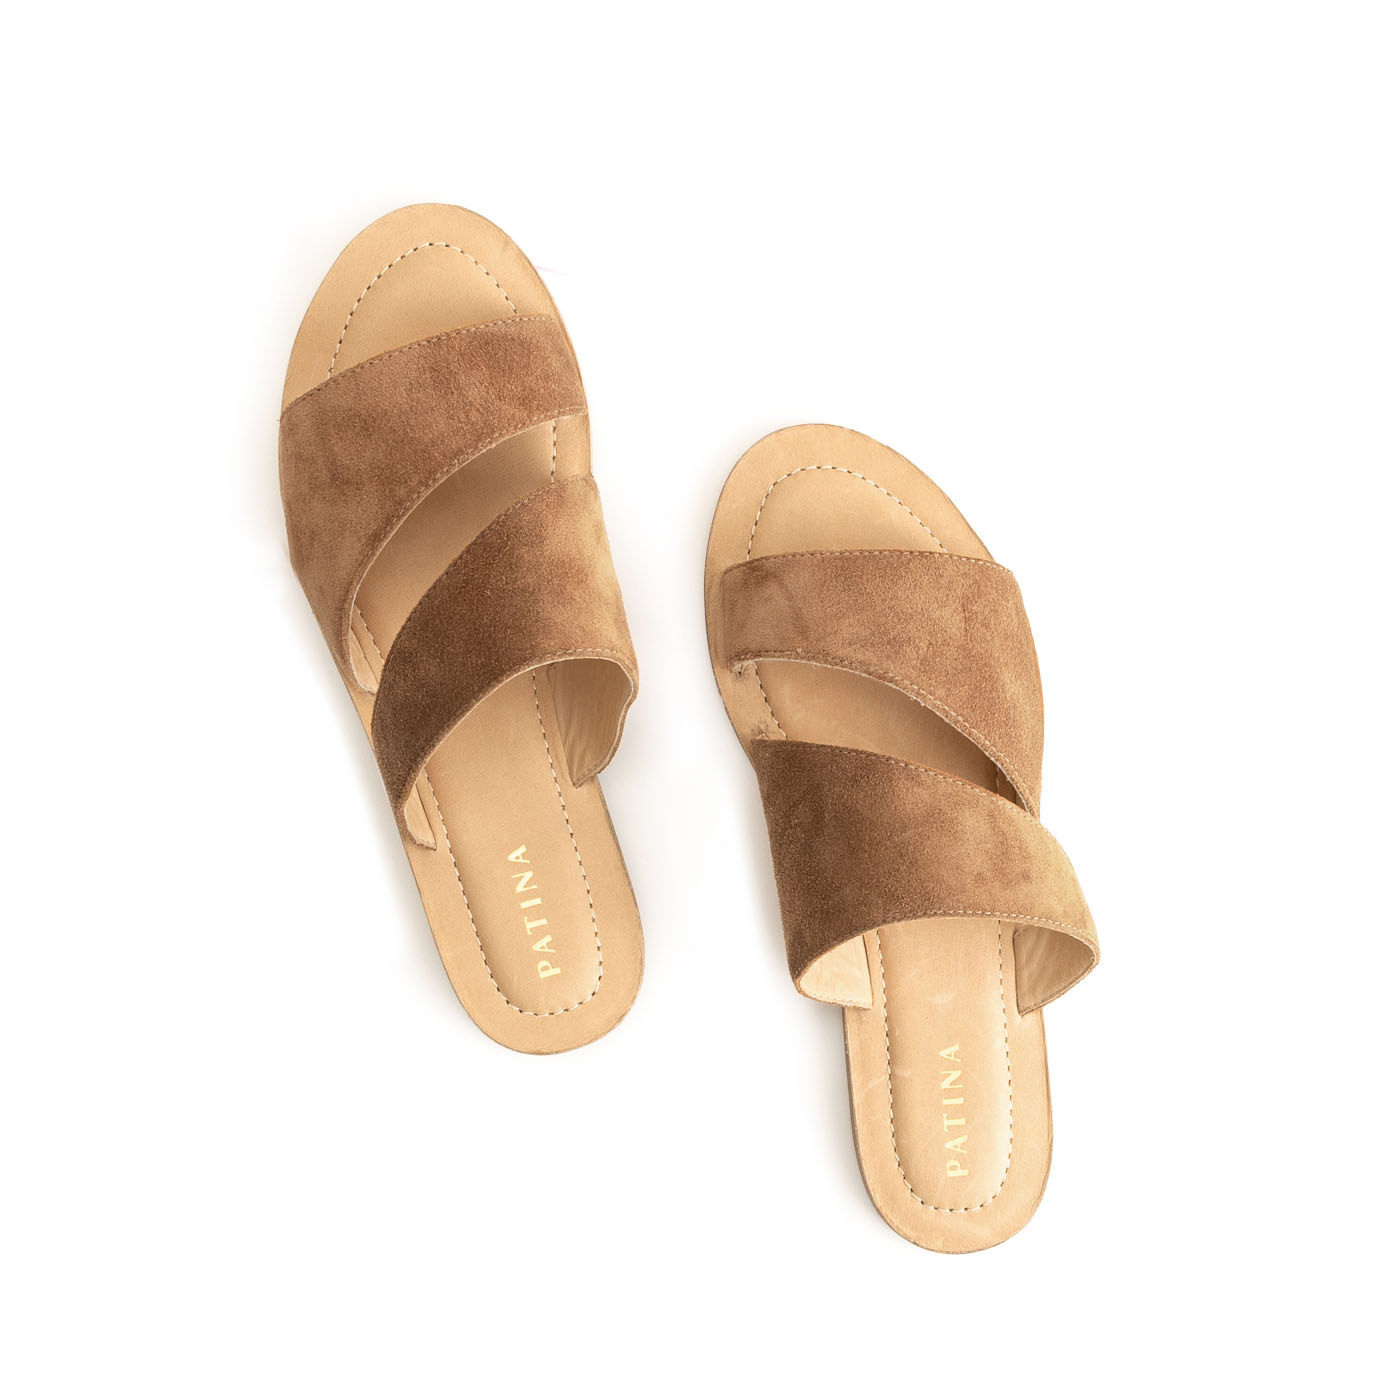 'Almost Perfect' Double Swirl Slide Sandal – Portland Leather